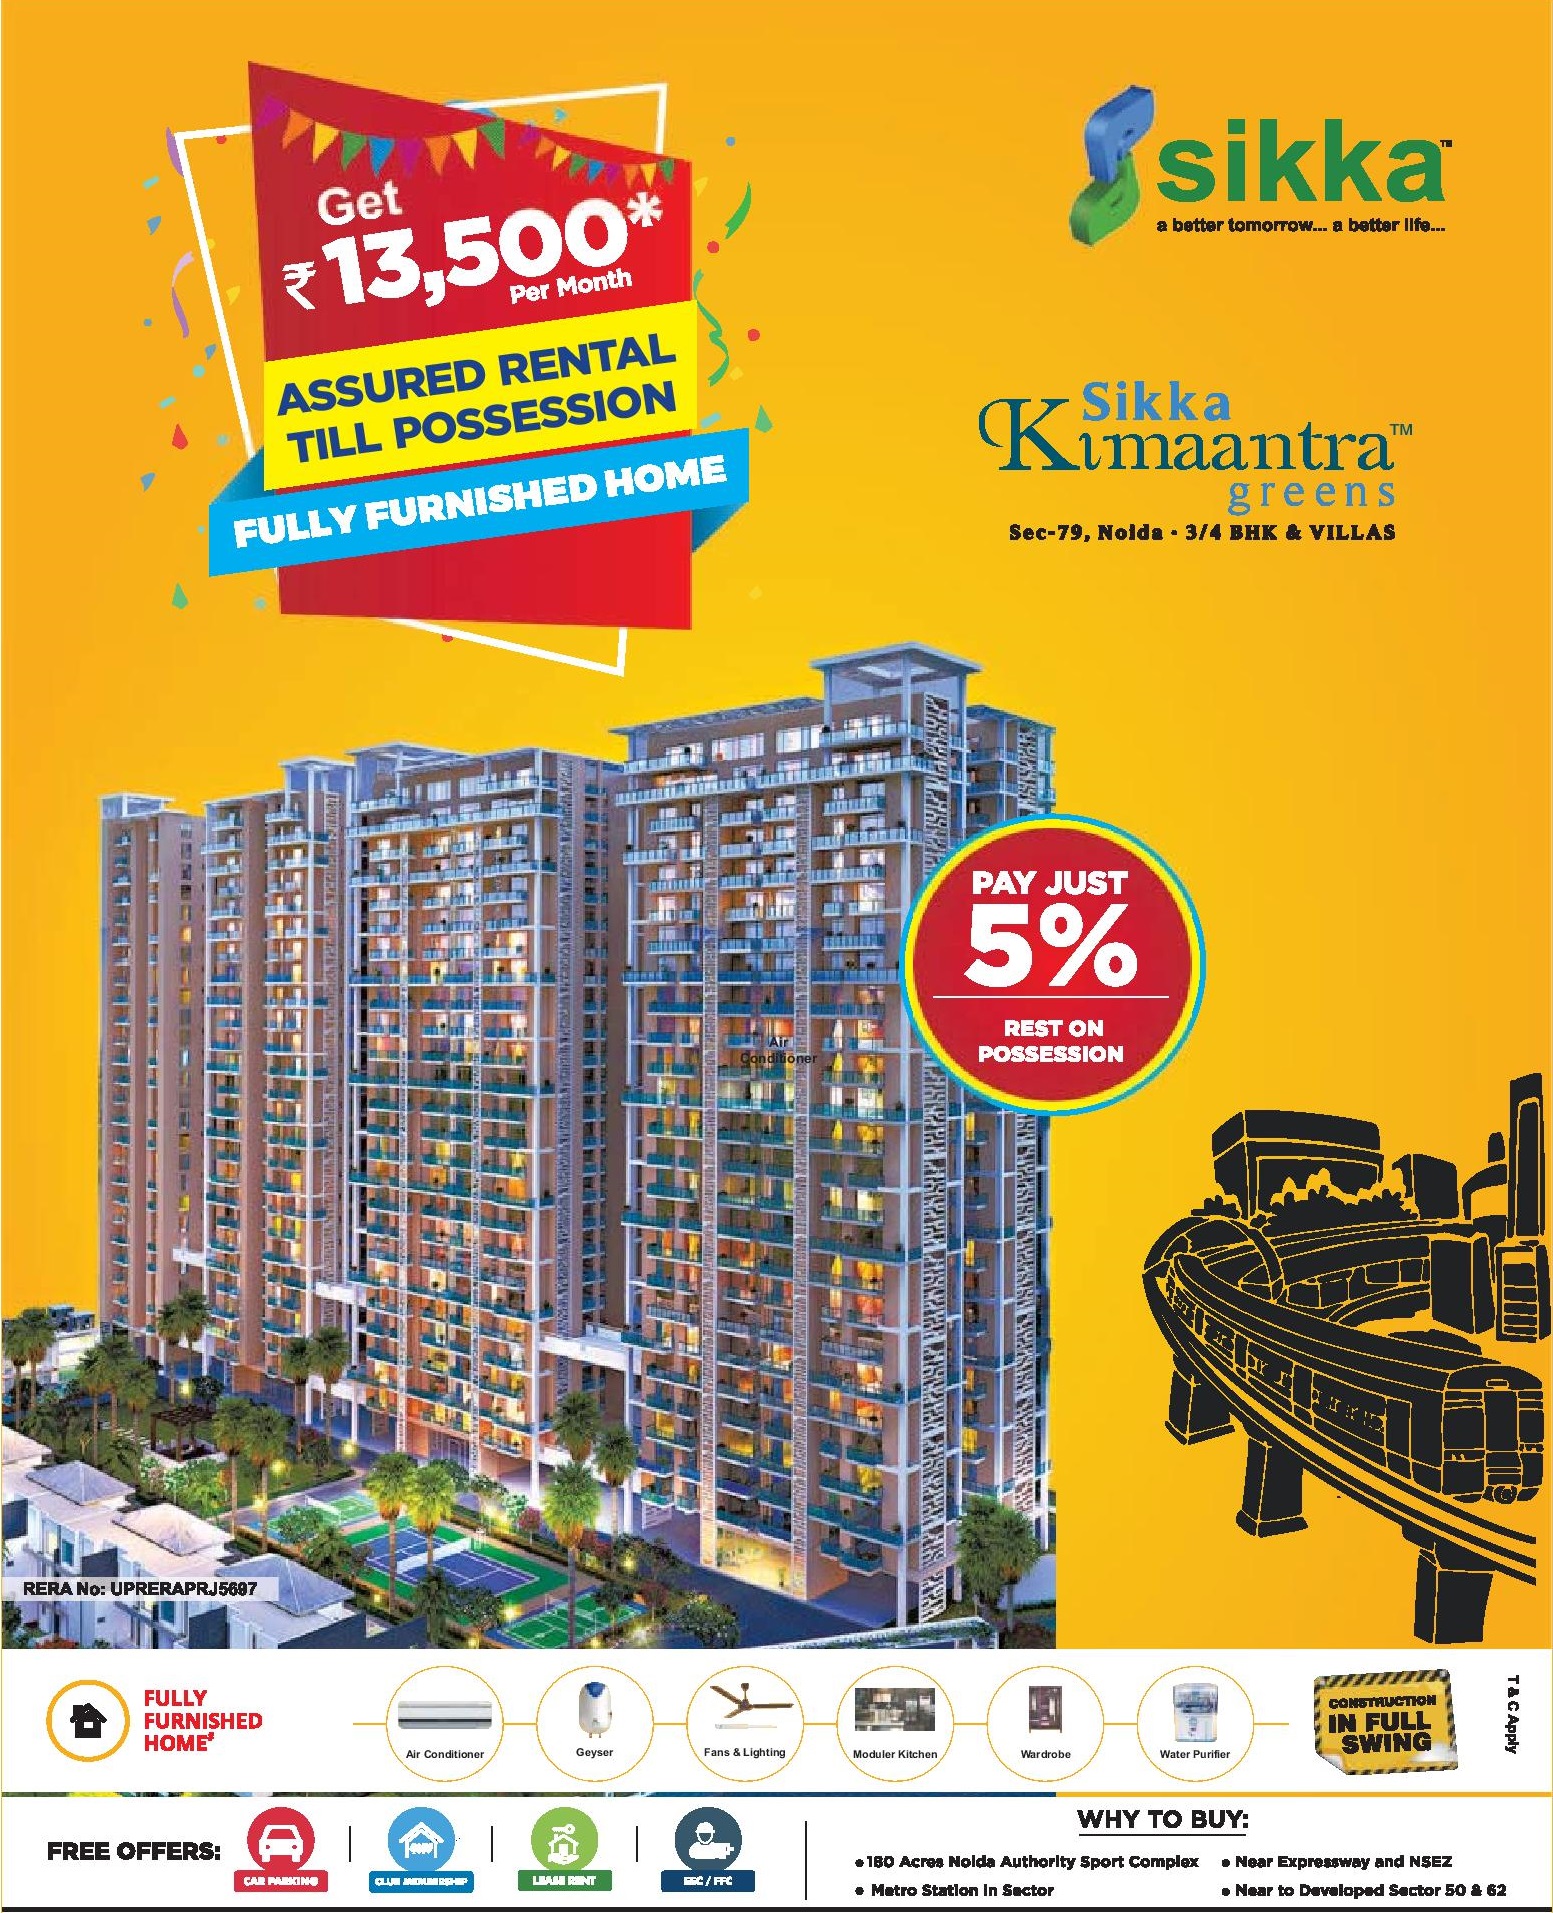 Get Rs. 13500 pm assured rental till possession at Sikka Kimaantra Greens in Noida Update